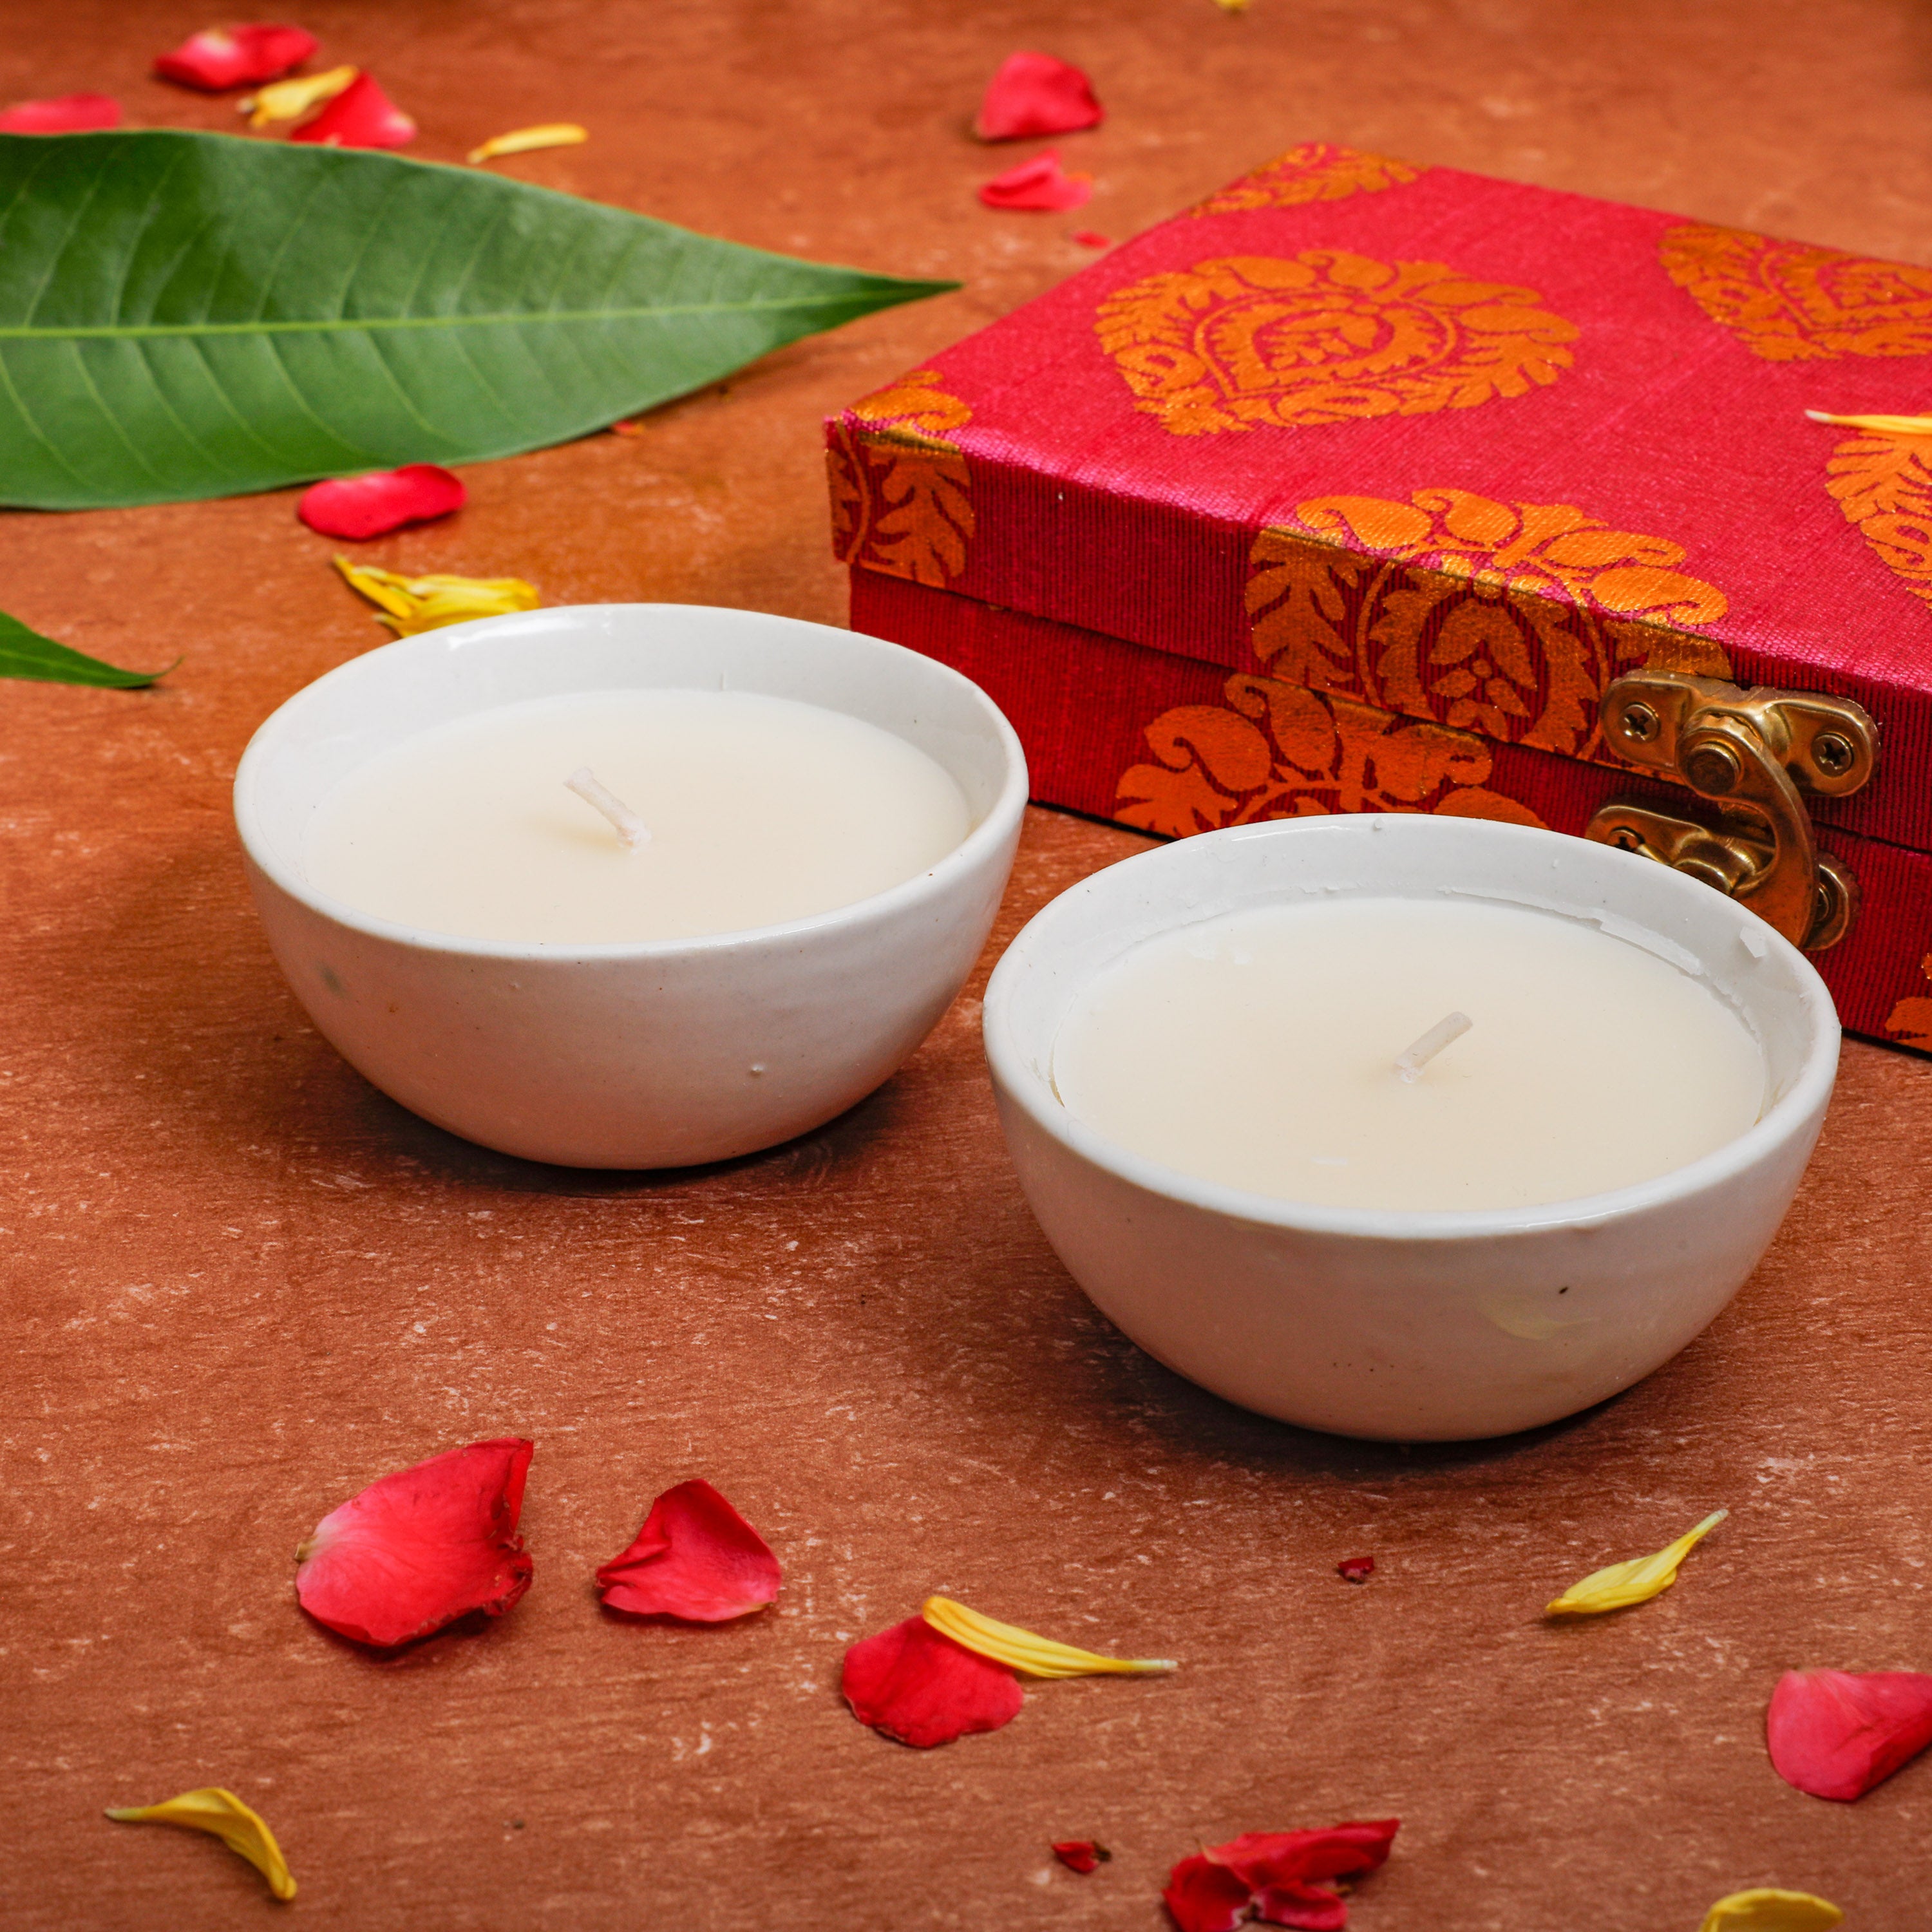 Aromatic scented candles filled in ceramic bowl